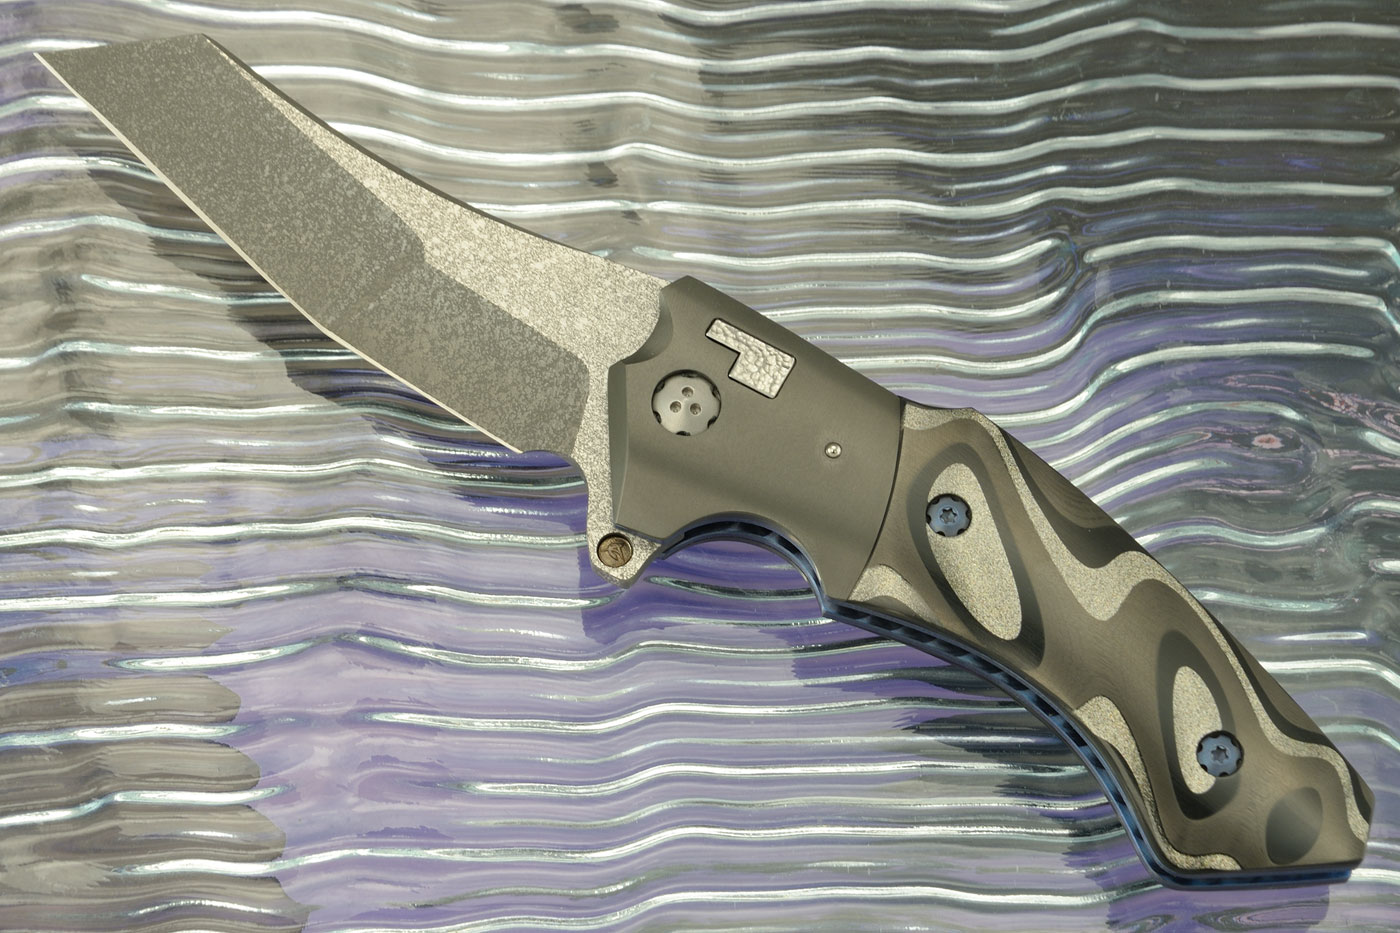 Black Dolphin Flipper with Chatoyant Carbon Fiber and Zirconium